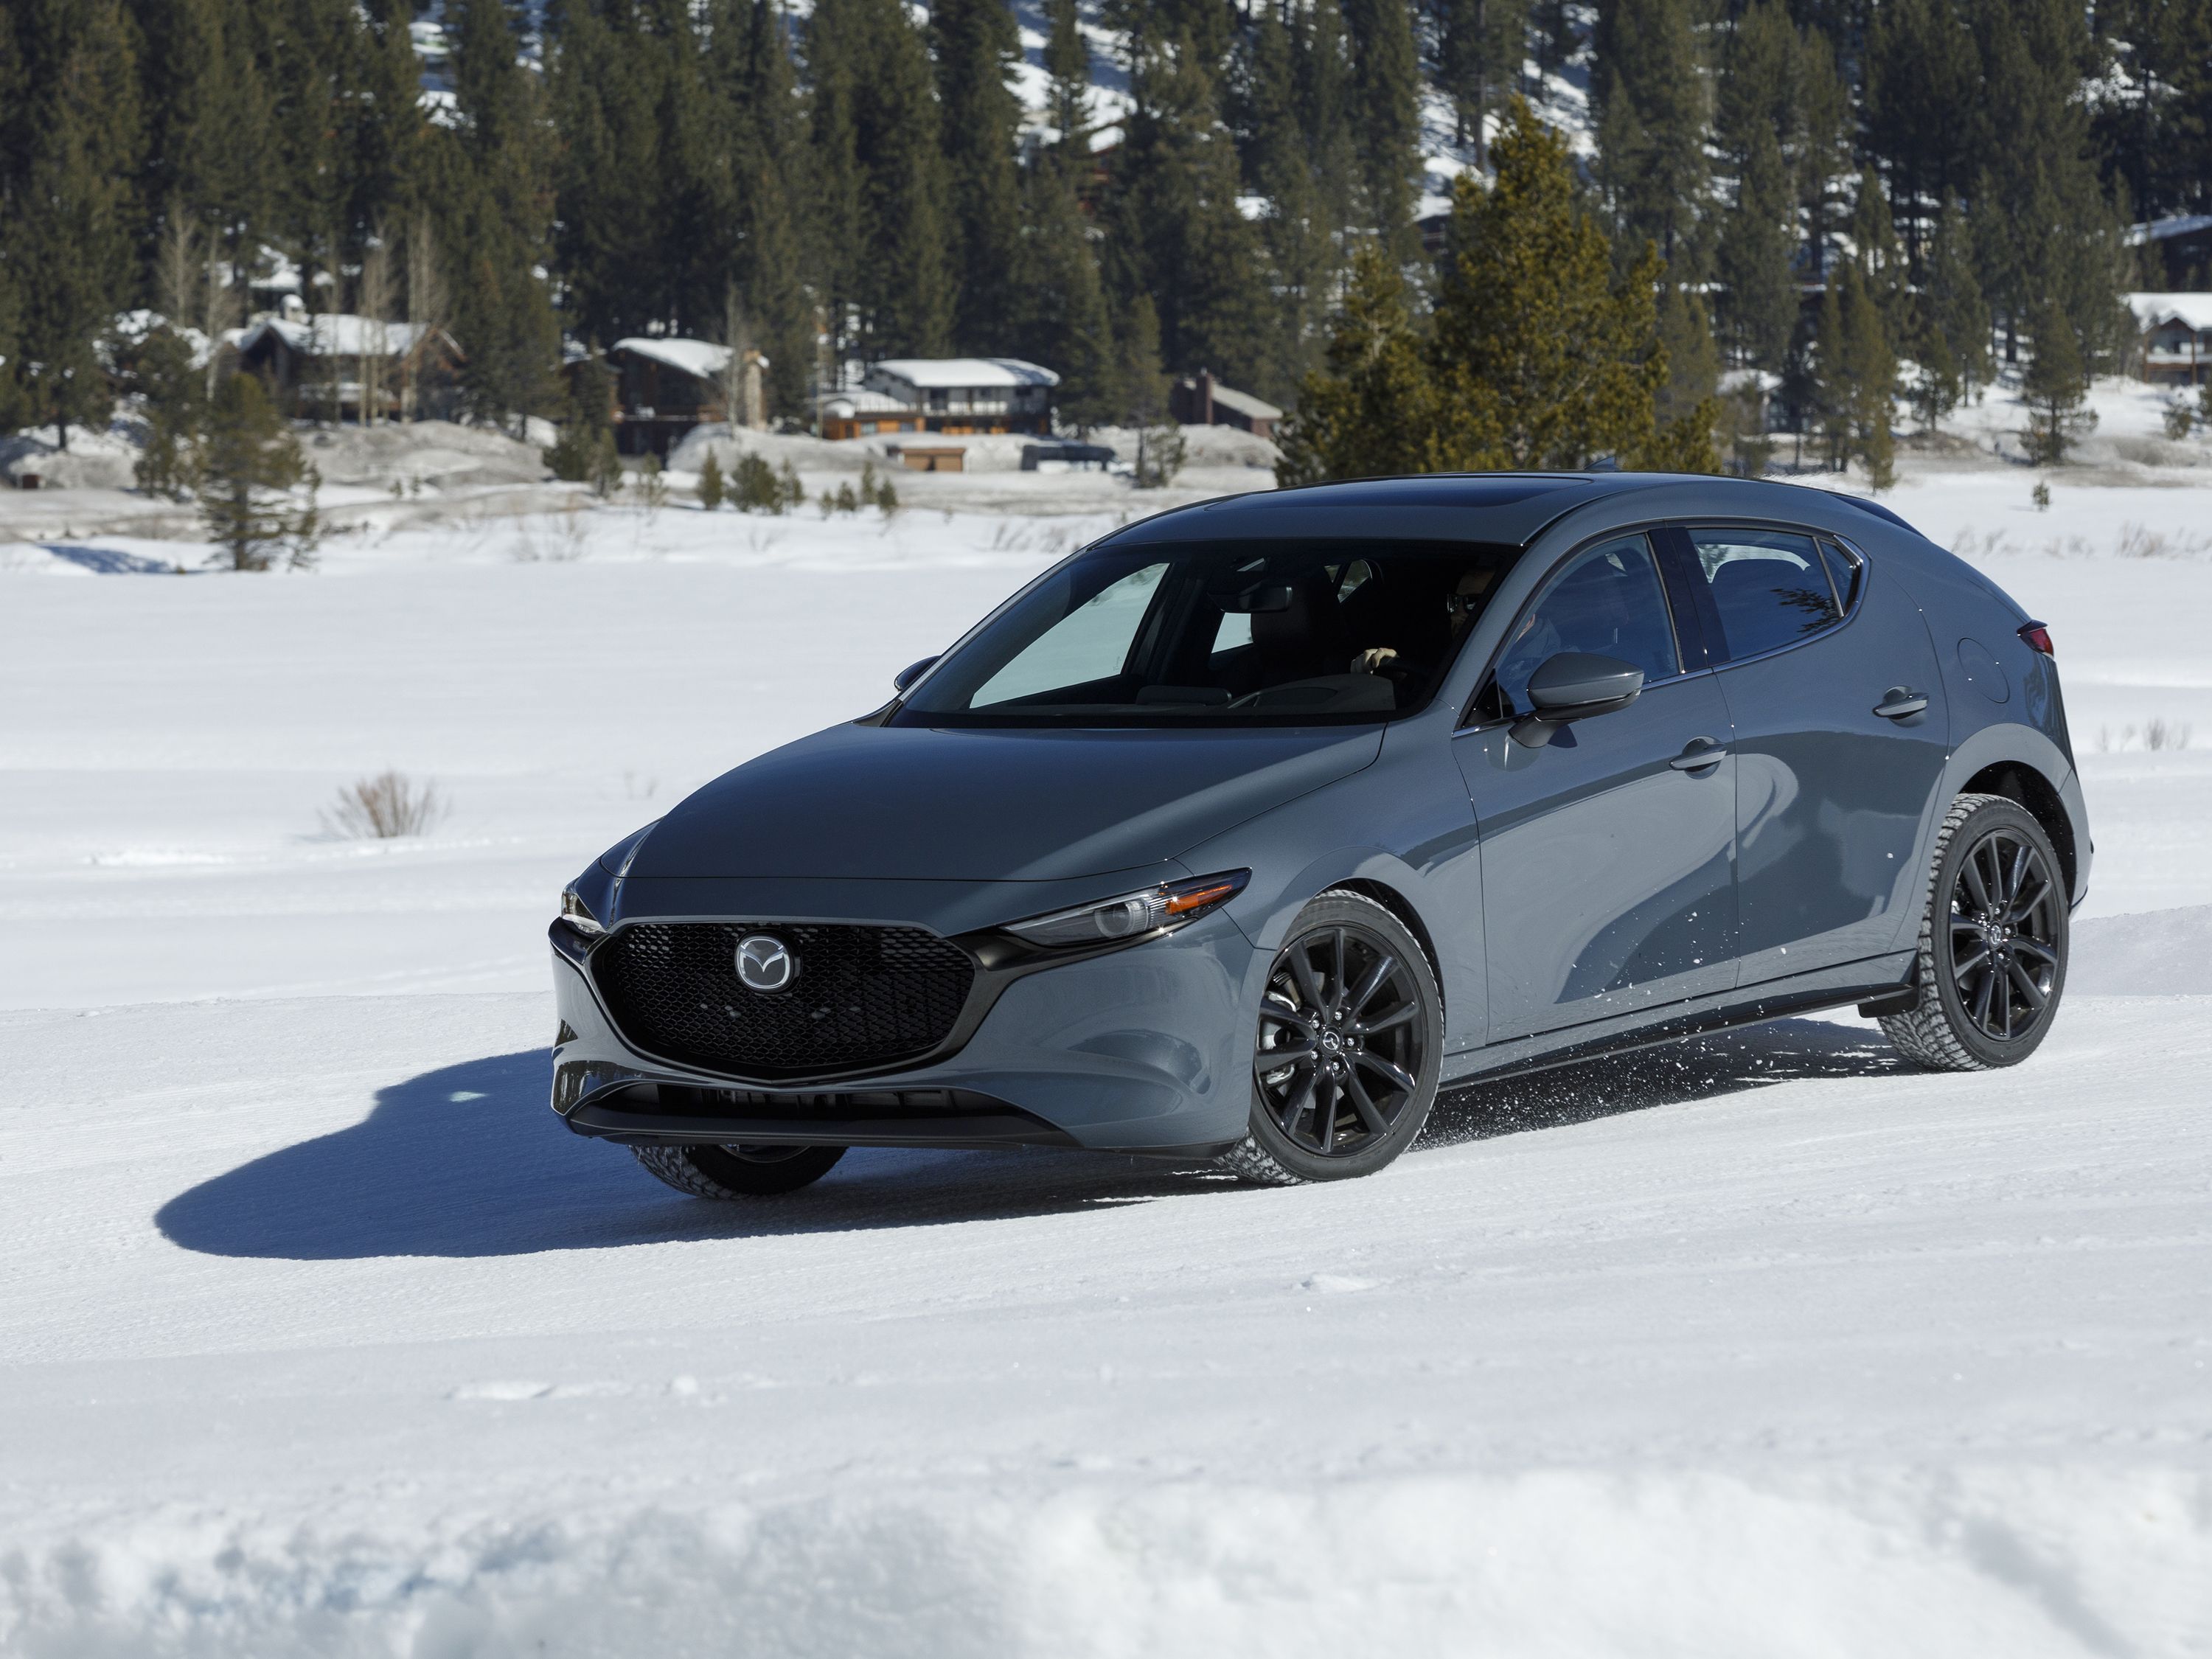 2019 Mazda 3 Make You Reconsider Your